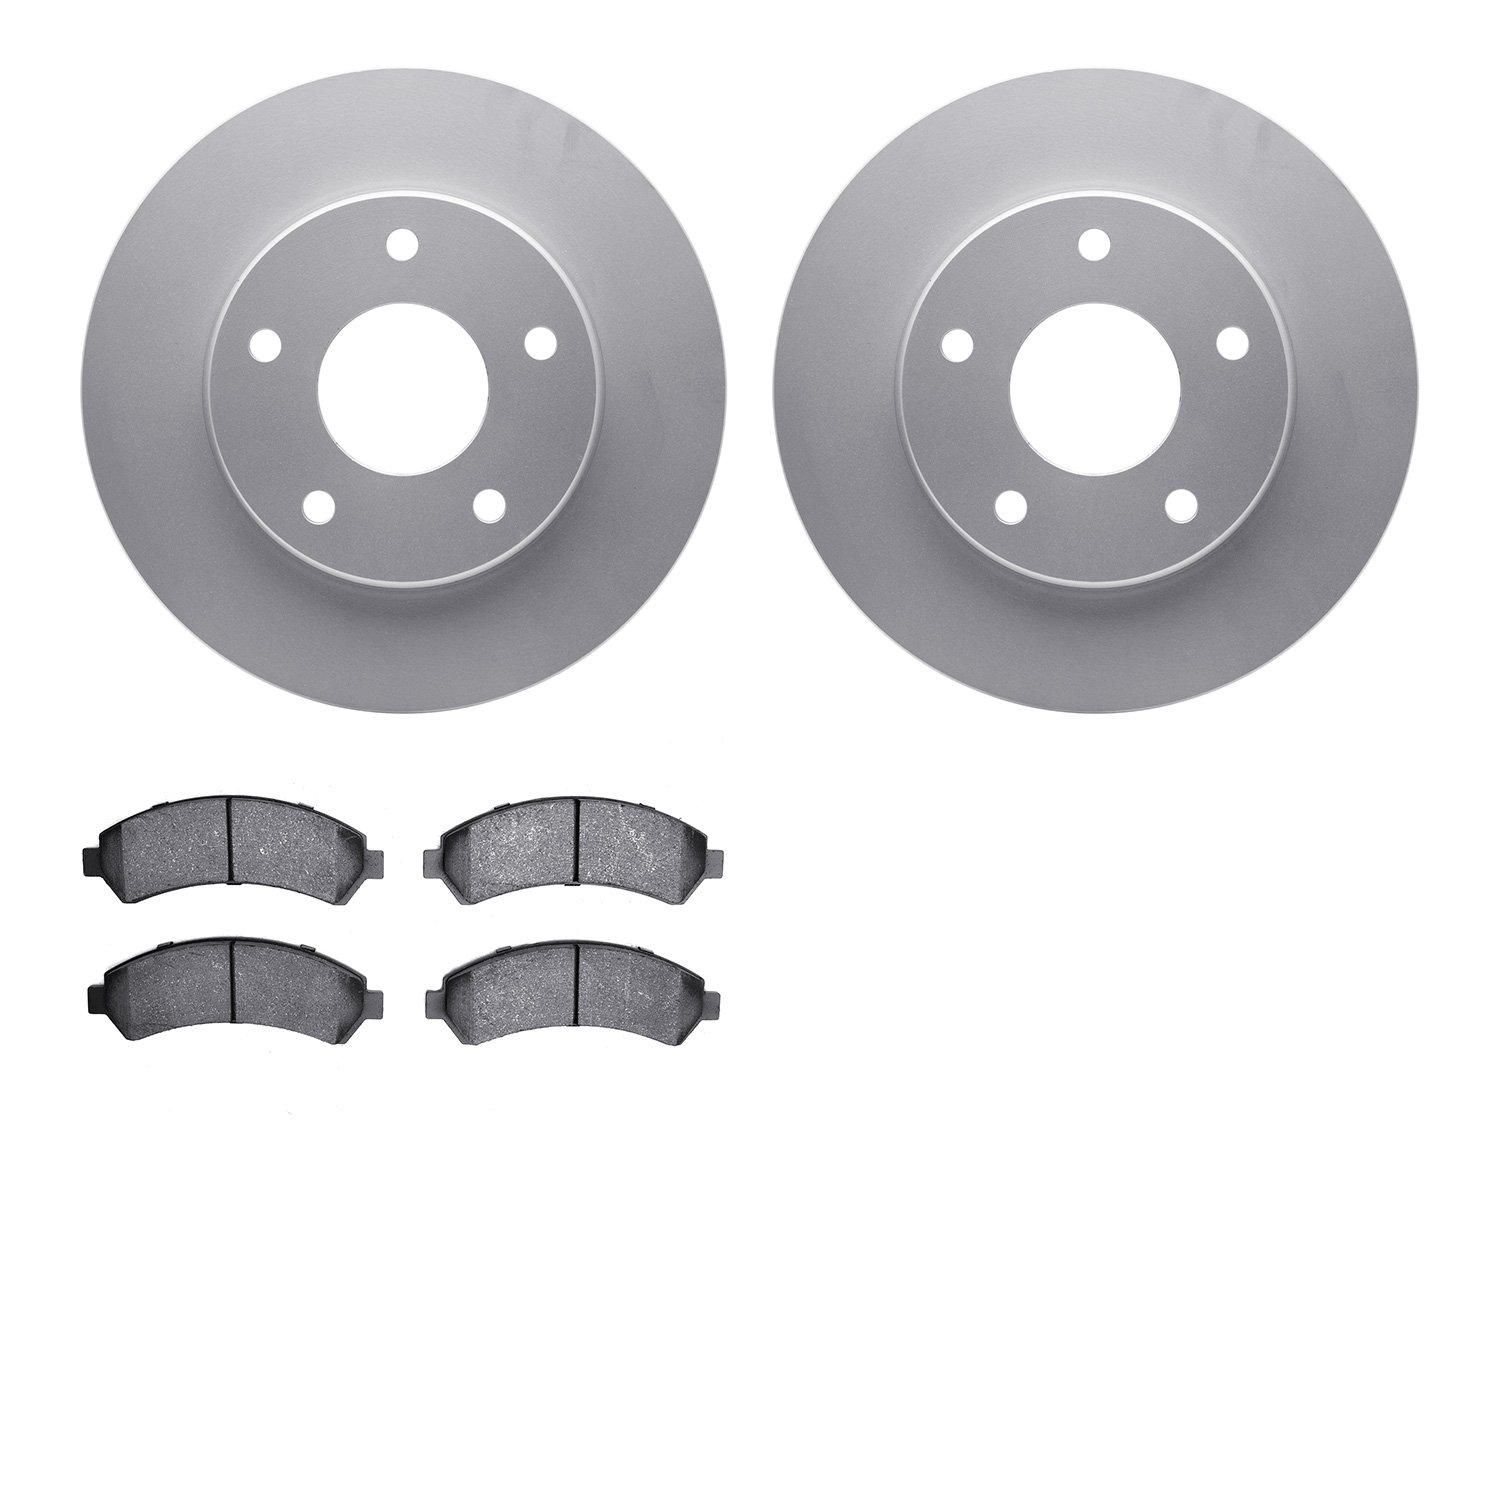 4402-48011 Geospec Brake Rotors with Ultimate-Duty Brake Pads Kit, 1997-2005 GM, Position: Front